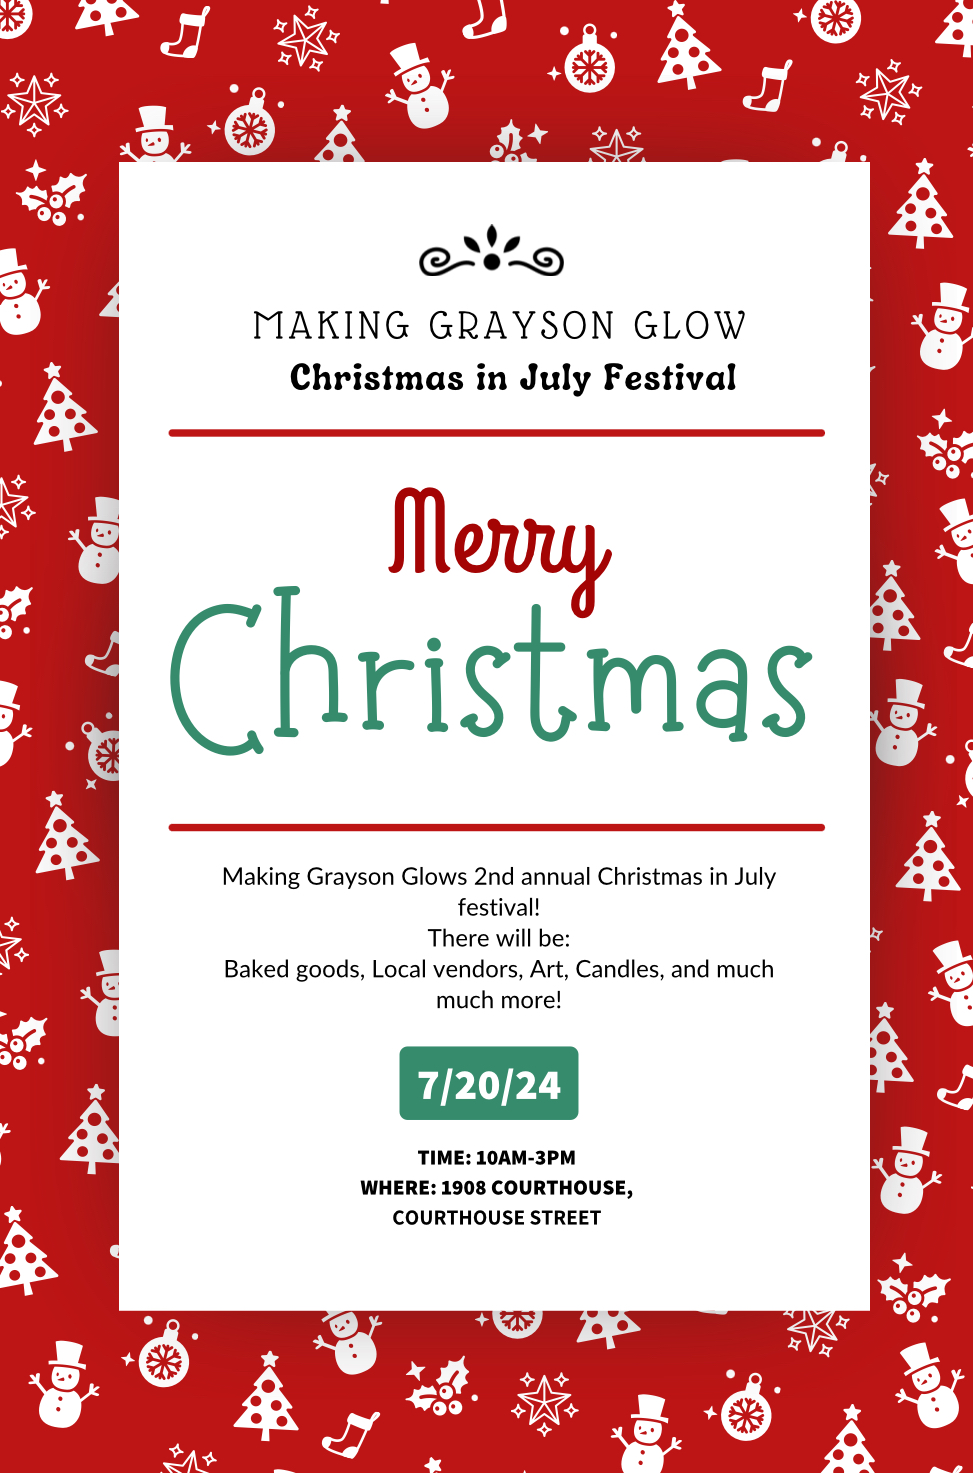 Making Grayson Glow’s Christmas in July